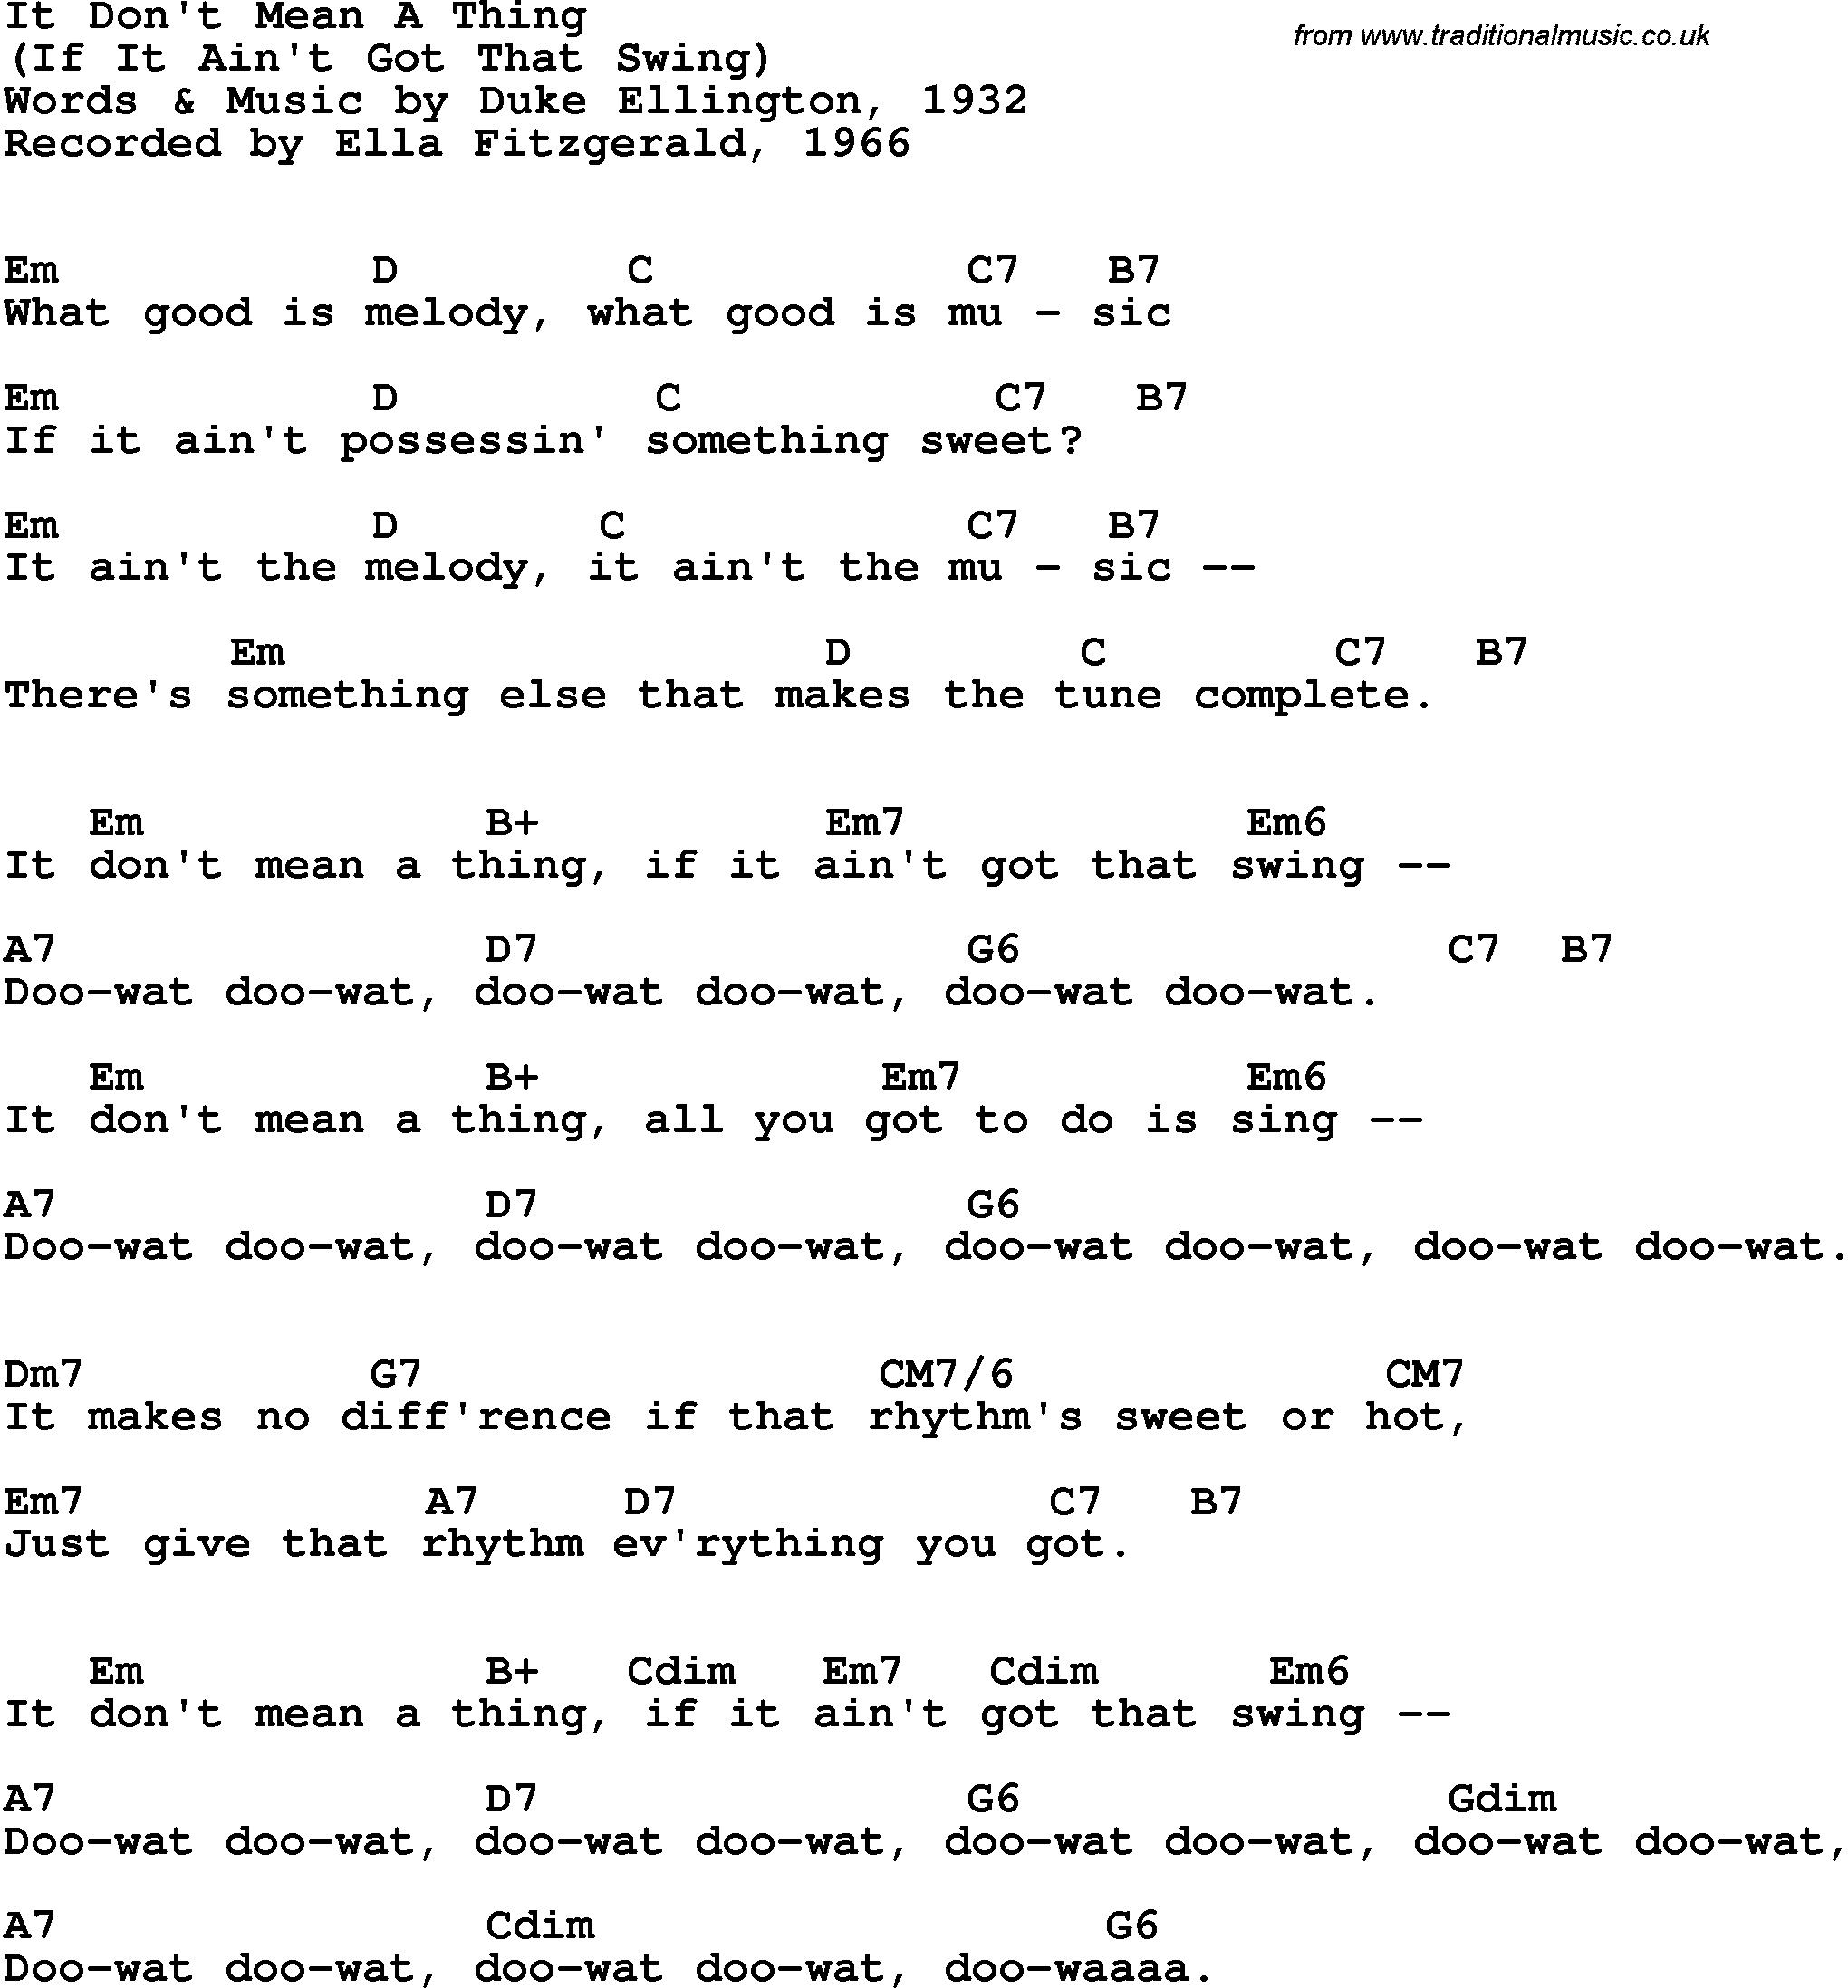 Song Lyrics with guitar chords for It Don't Mean A Thing - Ella Fitzgerald, 1966